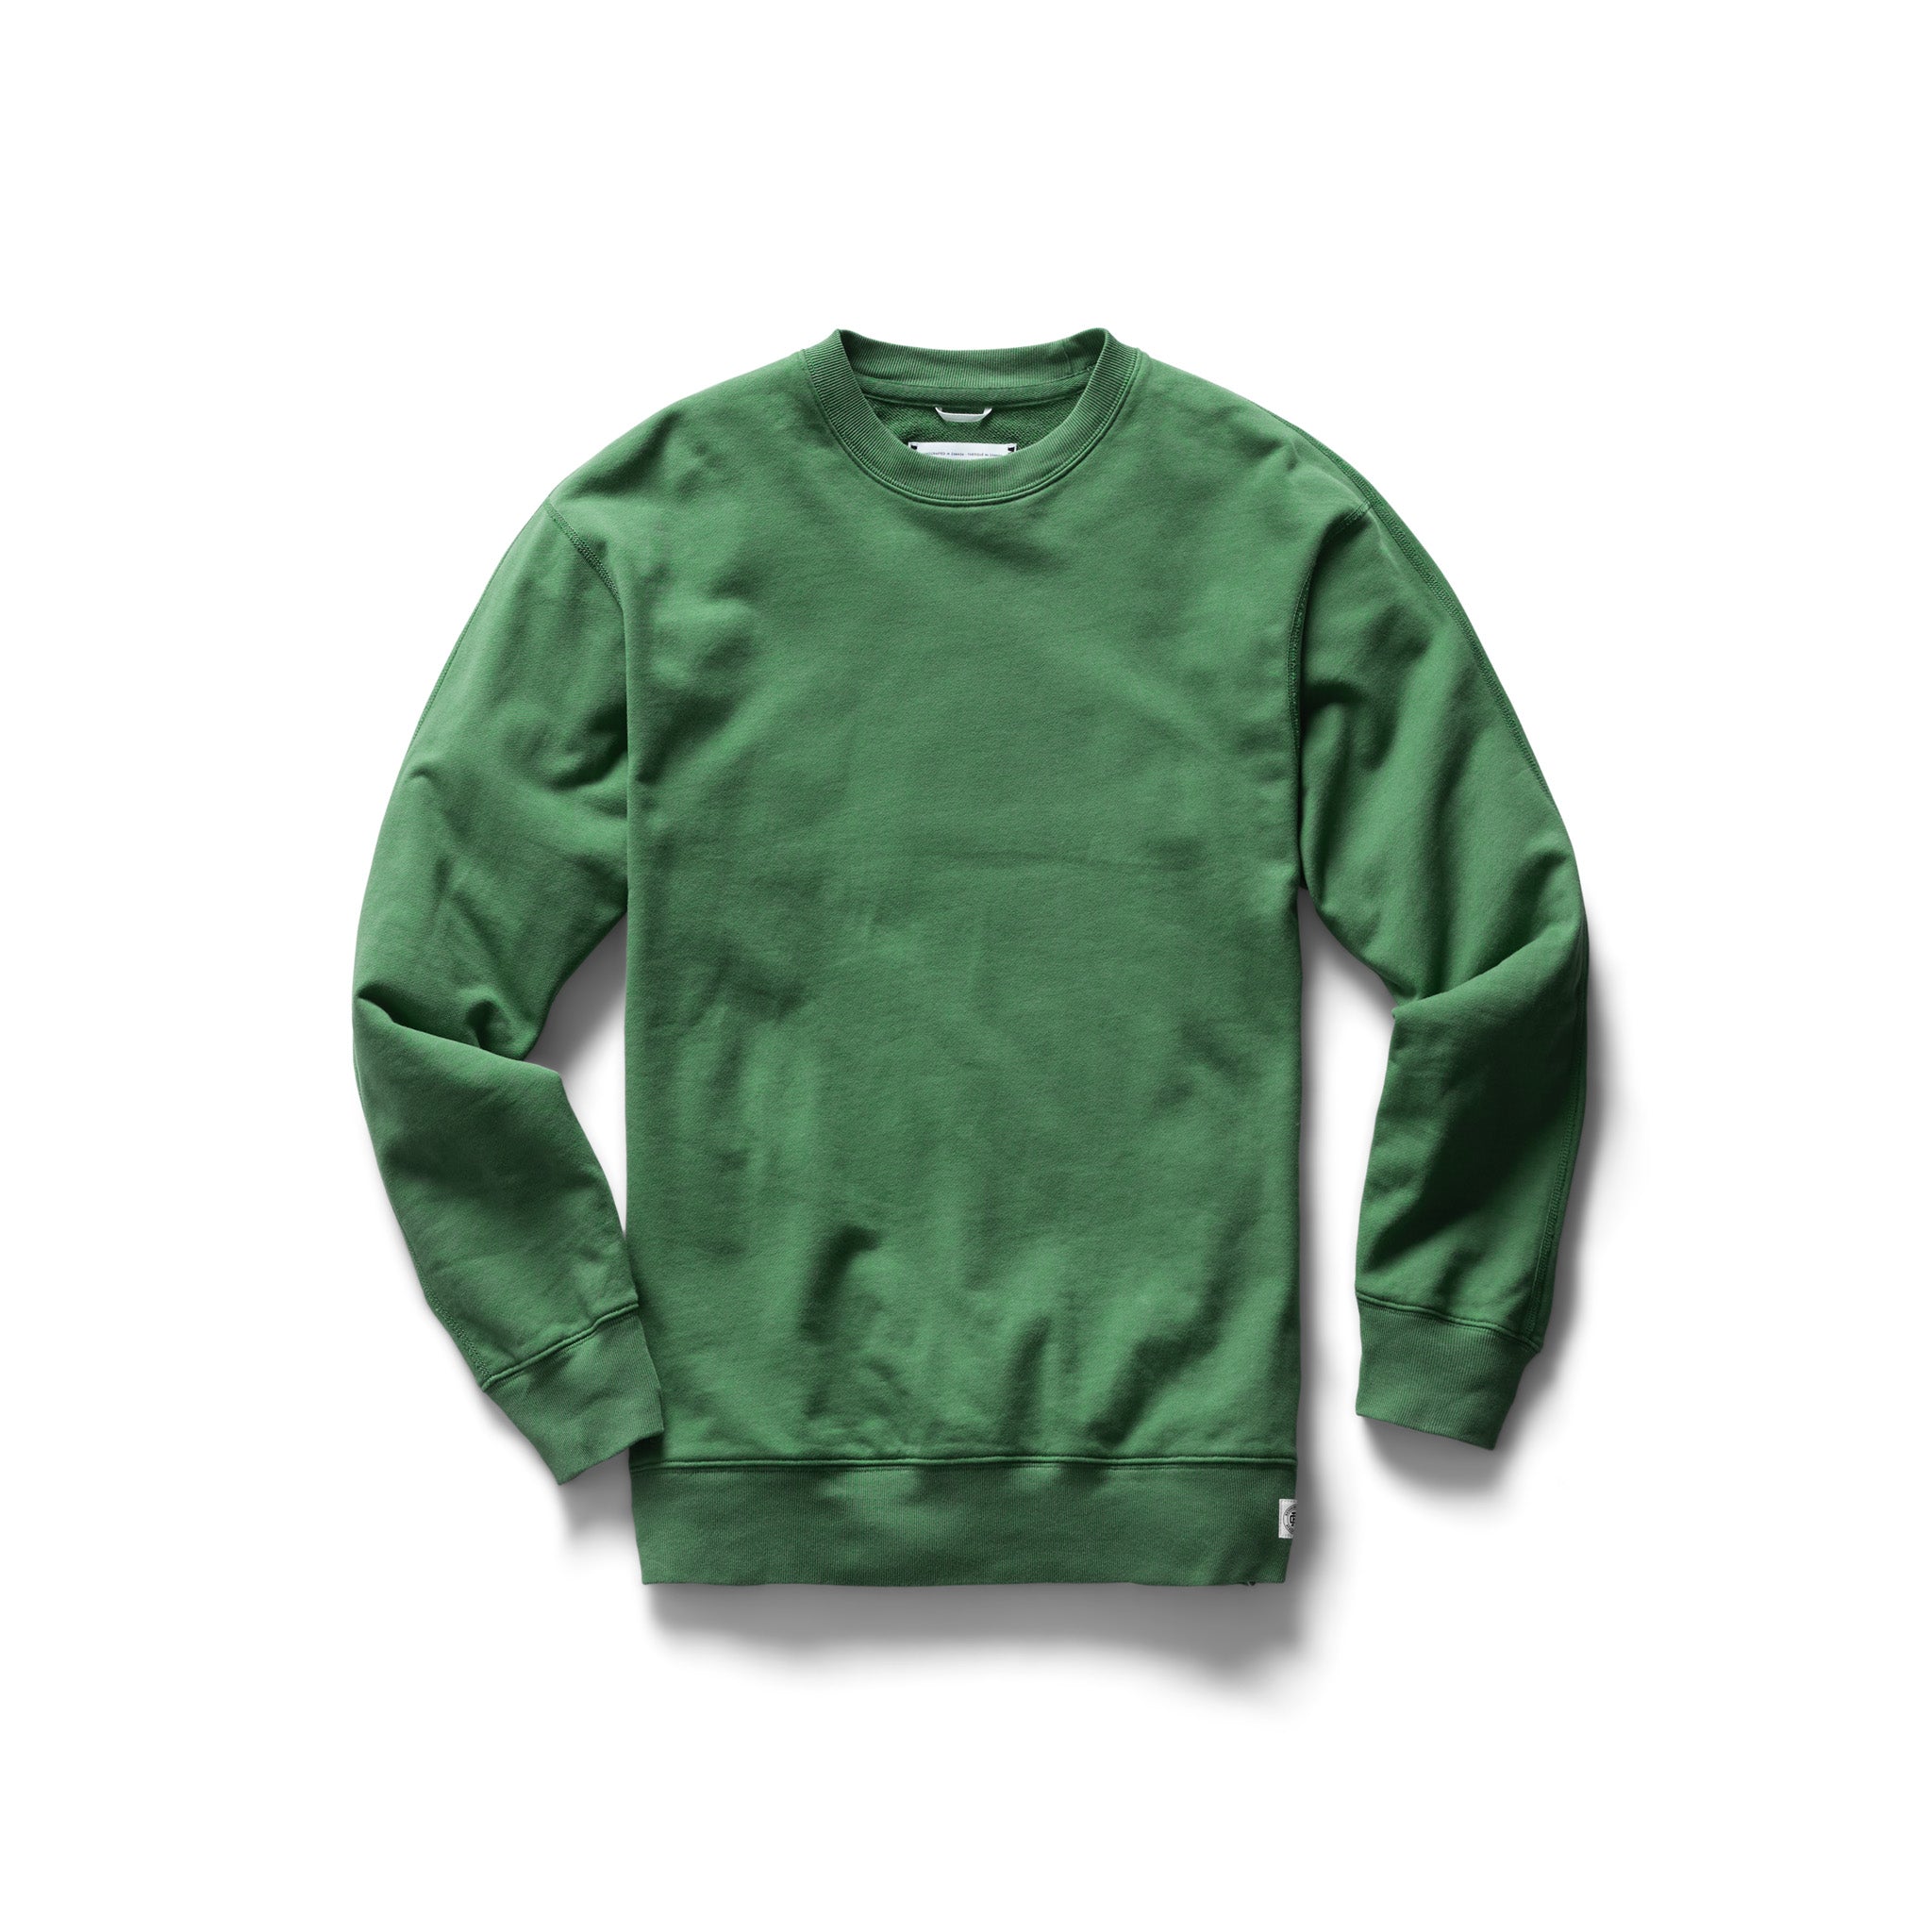 Wool&Prince | French Terry Sweatshirt - Forest night